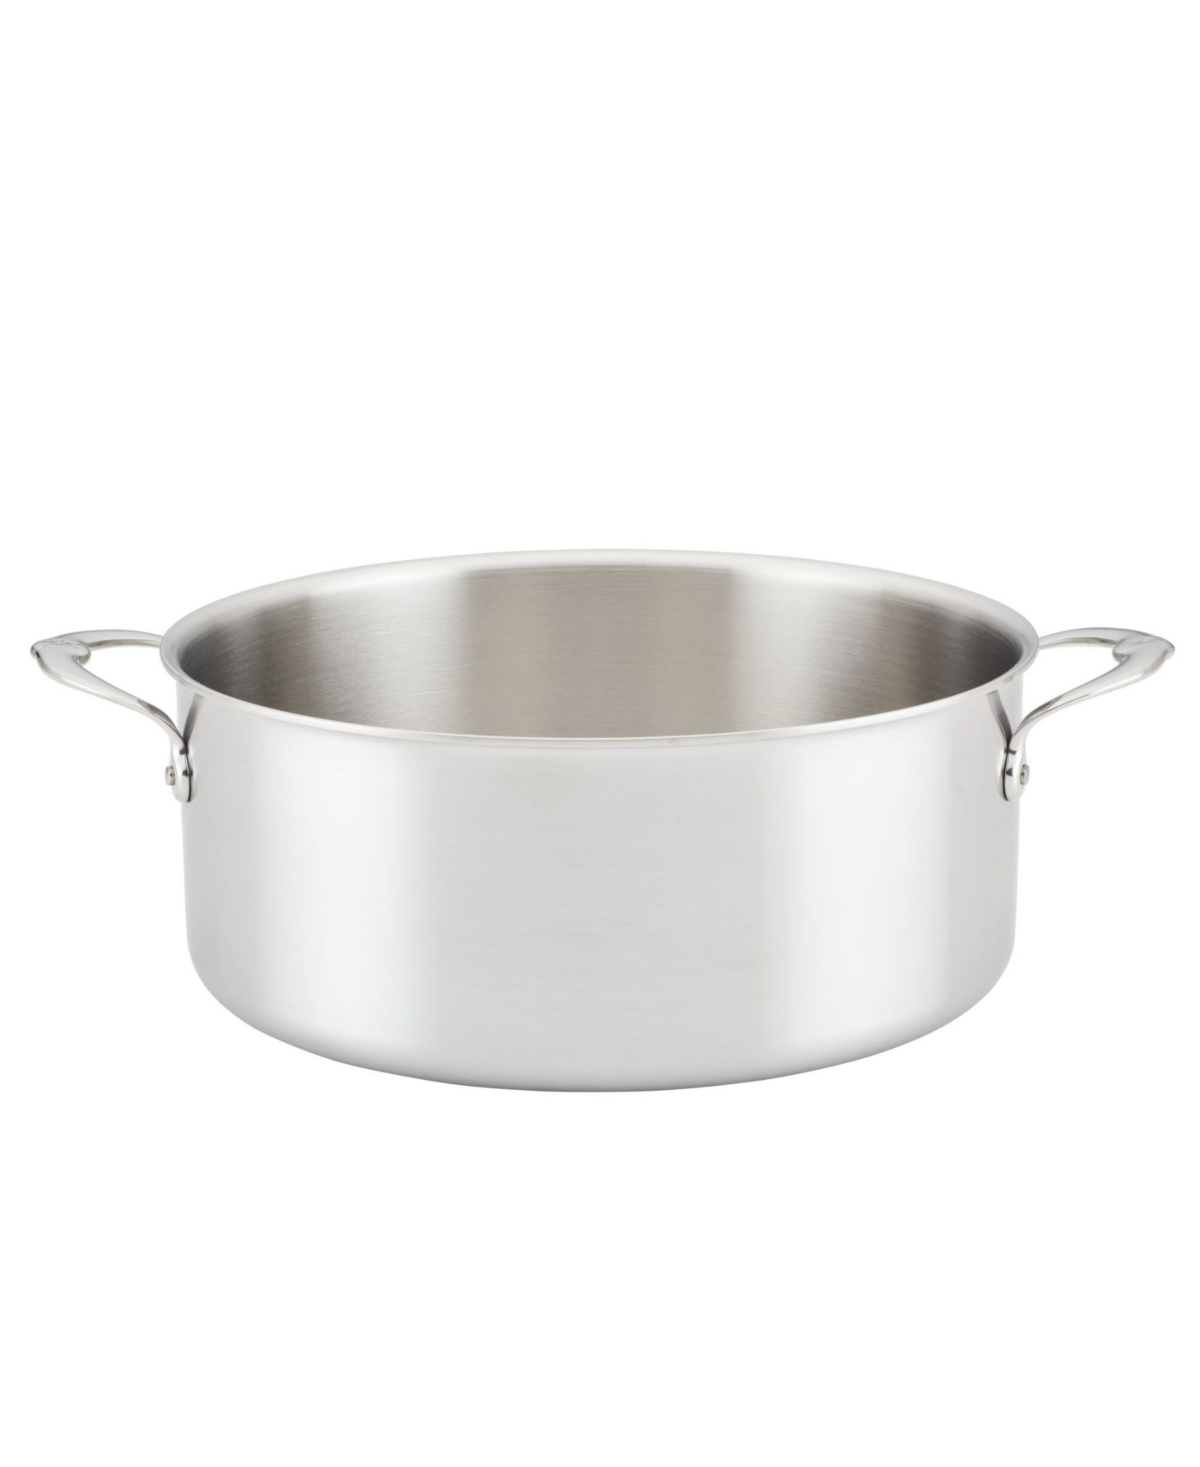 Shop Hestan Thomas Keller Insignia Commercial Clad Stainless Steel 9-quart Open Rondeau In No Color